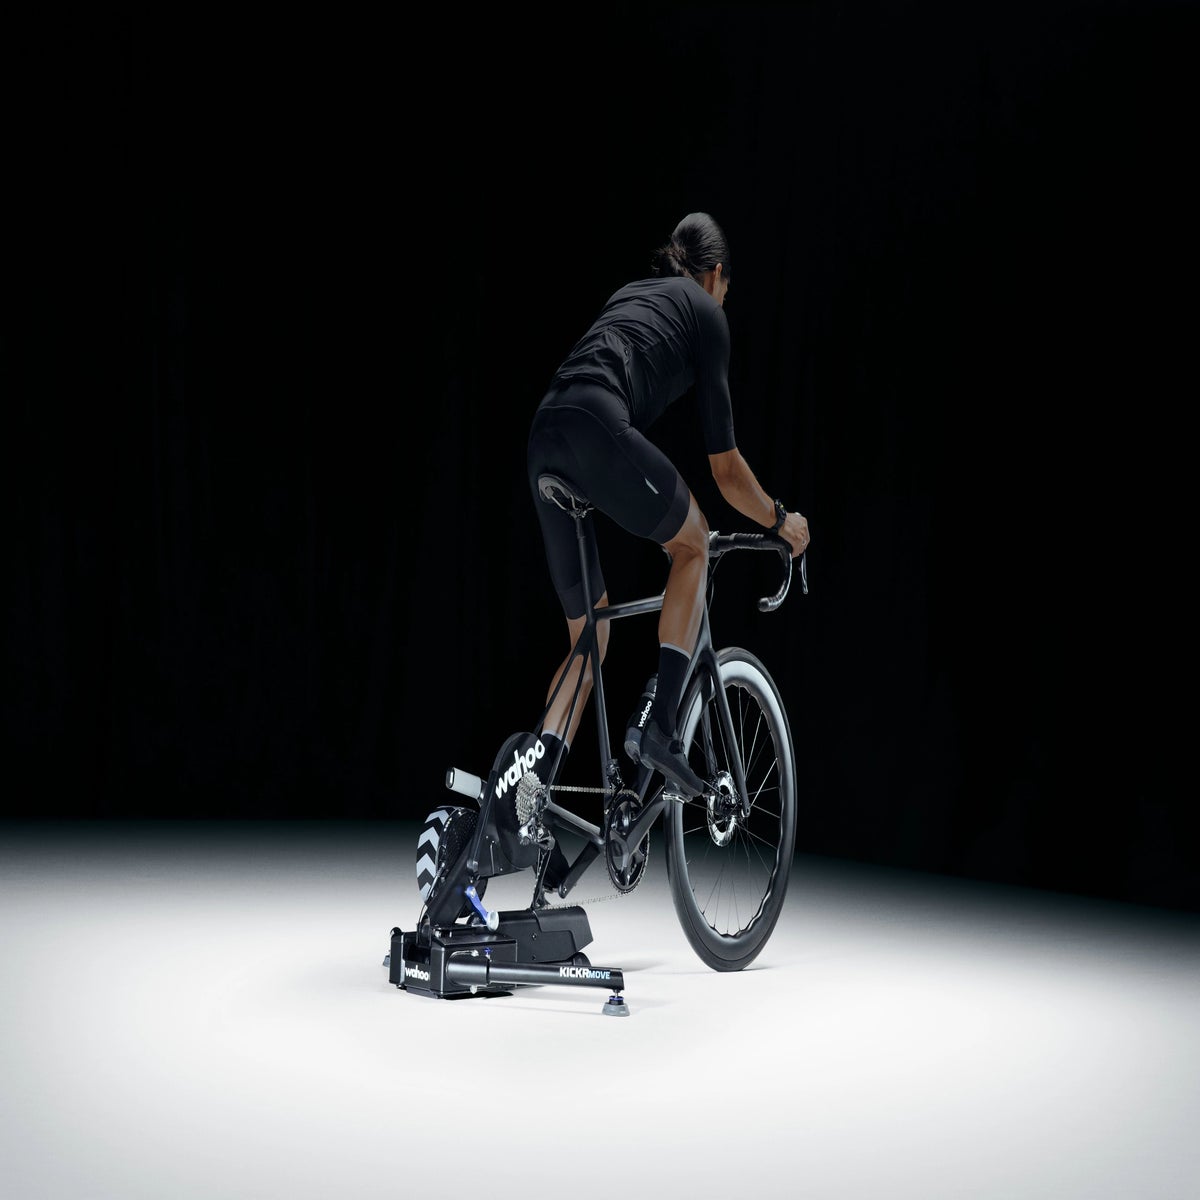 Wahoo's Kickr Move Adds Motion to Your Indoor Training